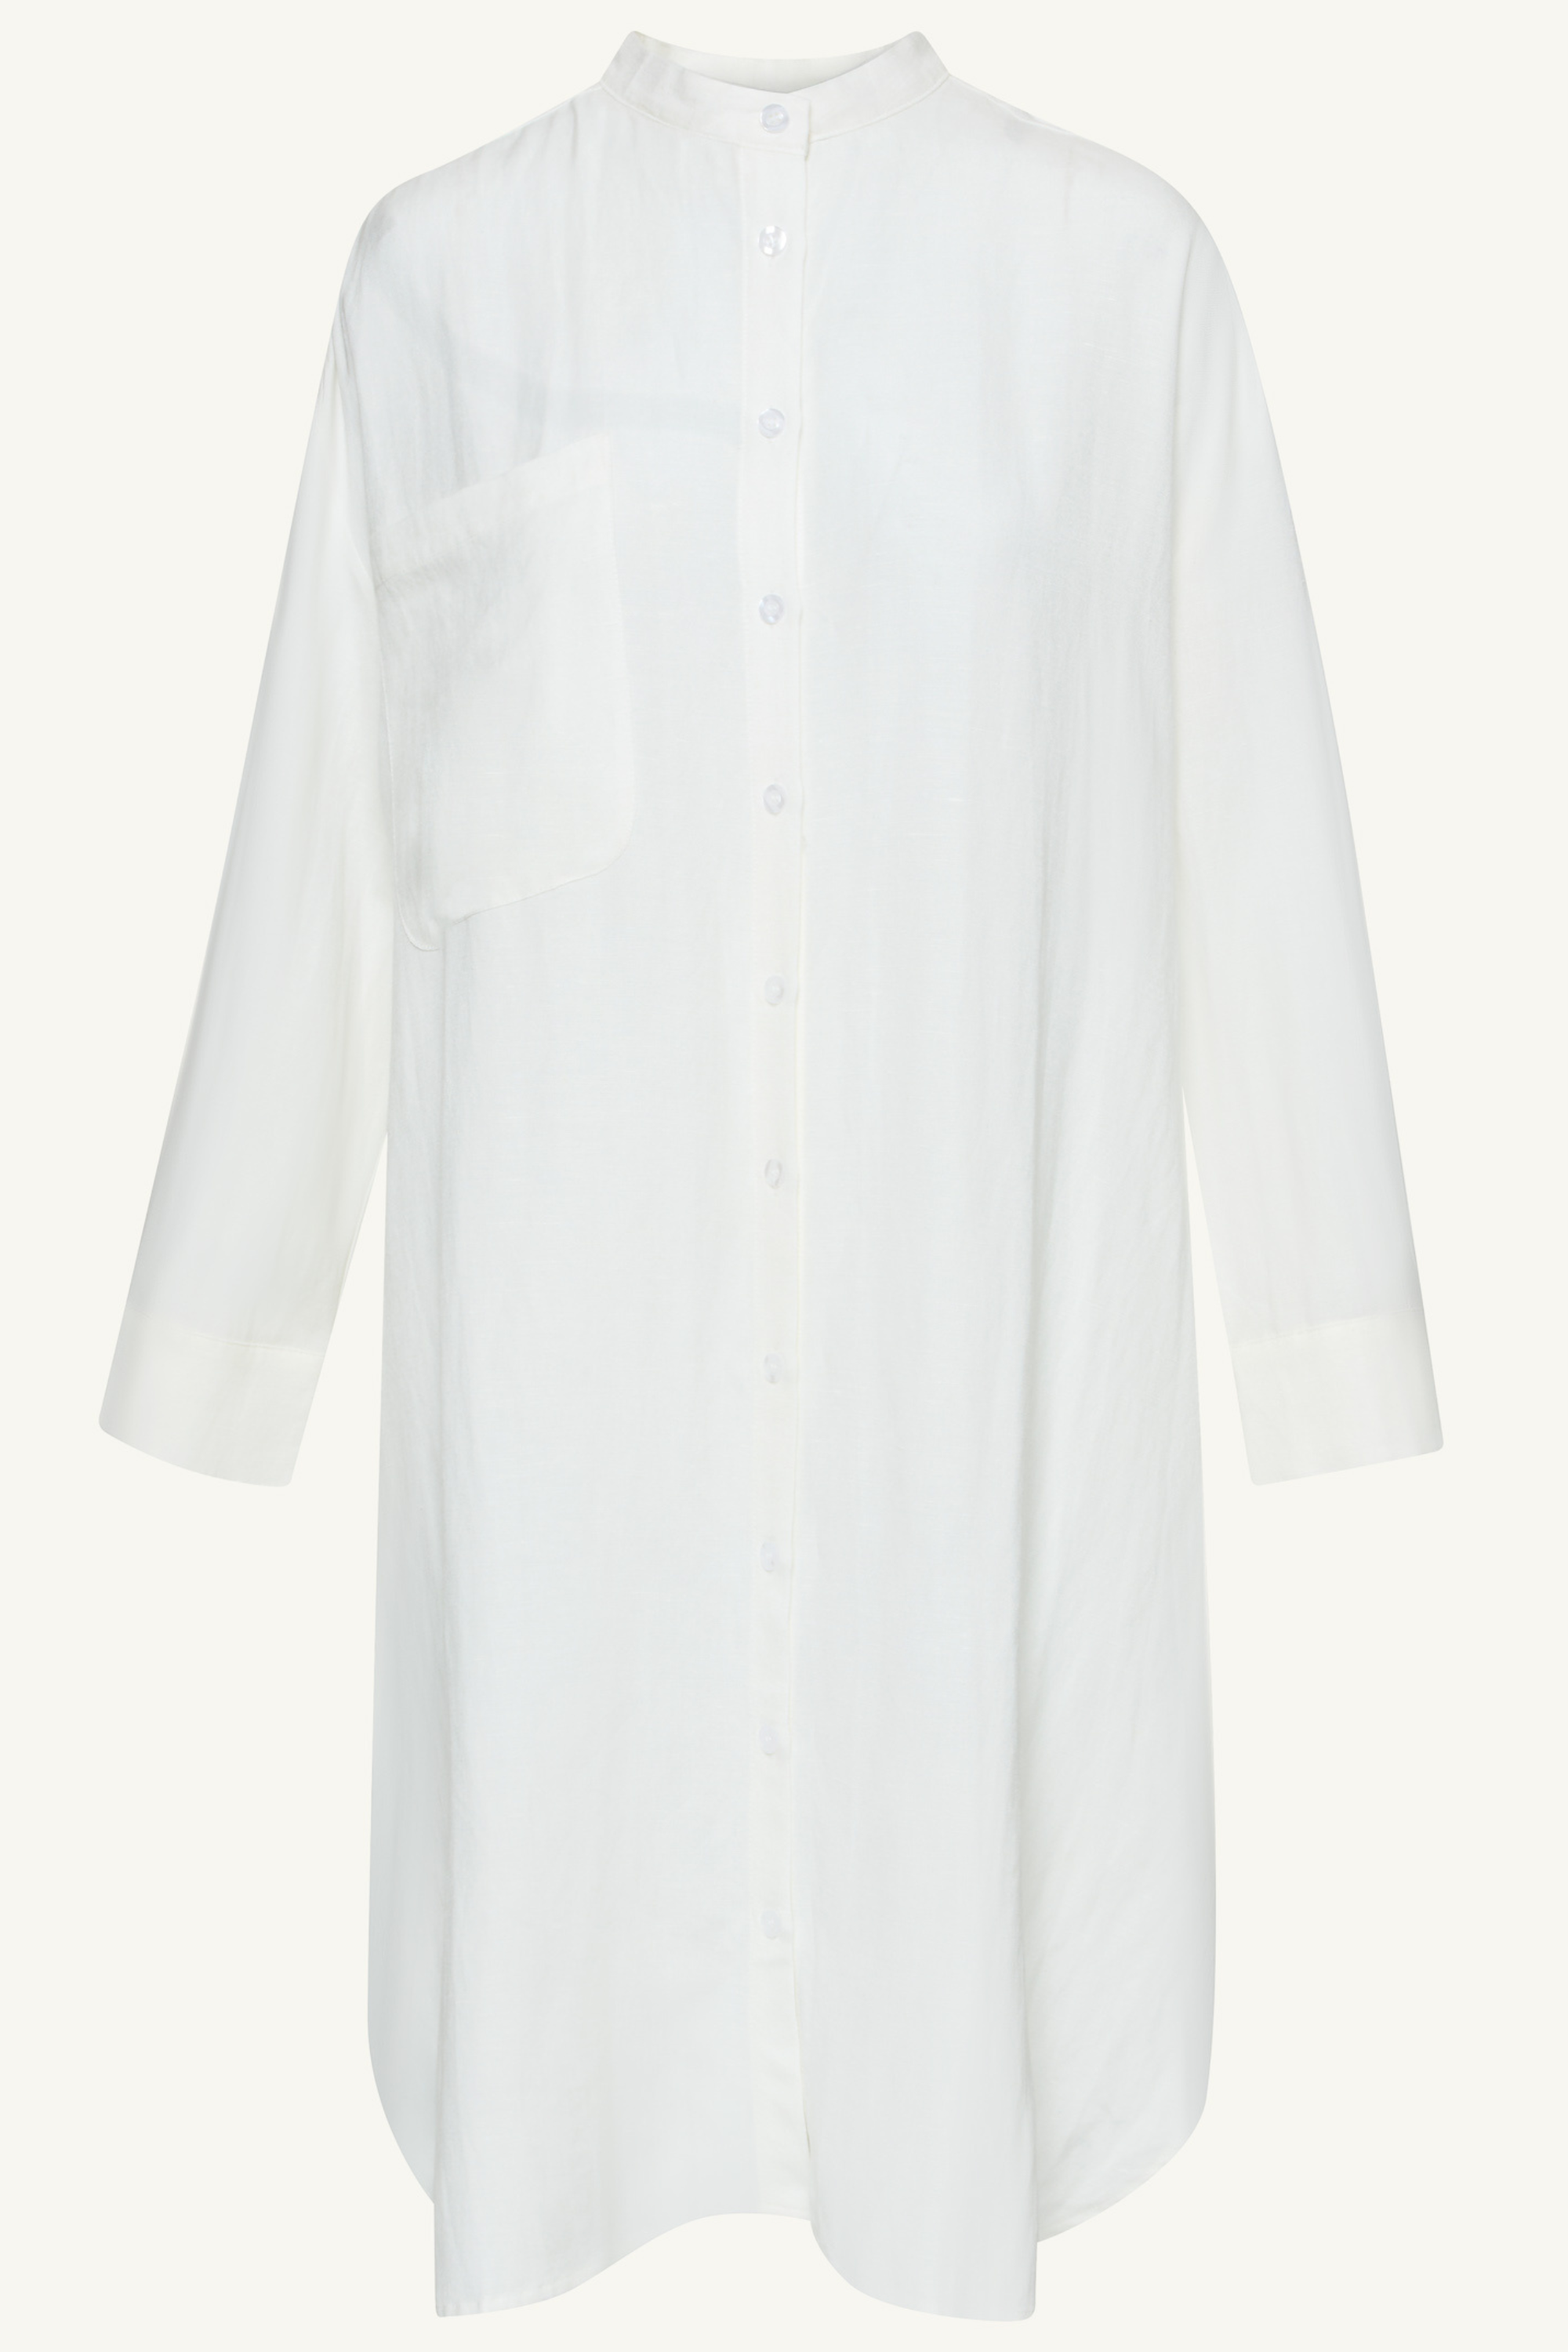 Linen Longline Button Down Cover Up Top - White